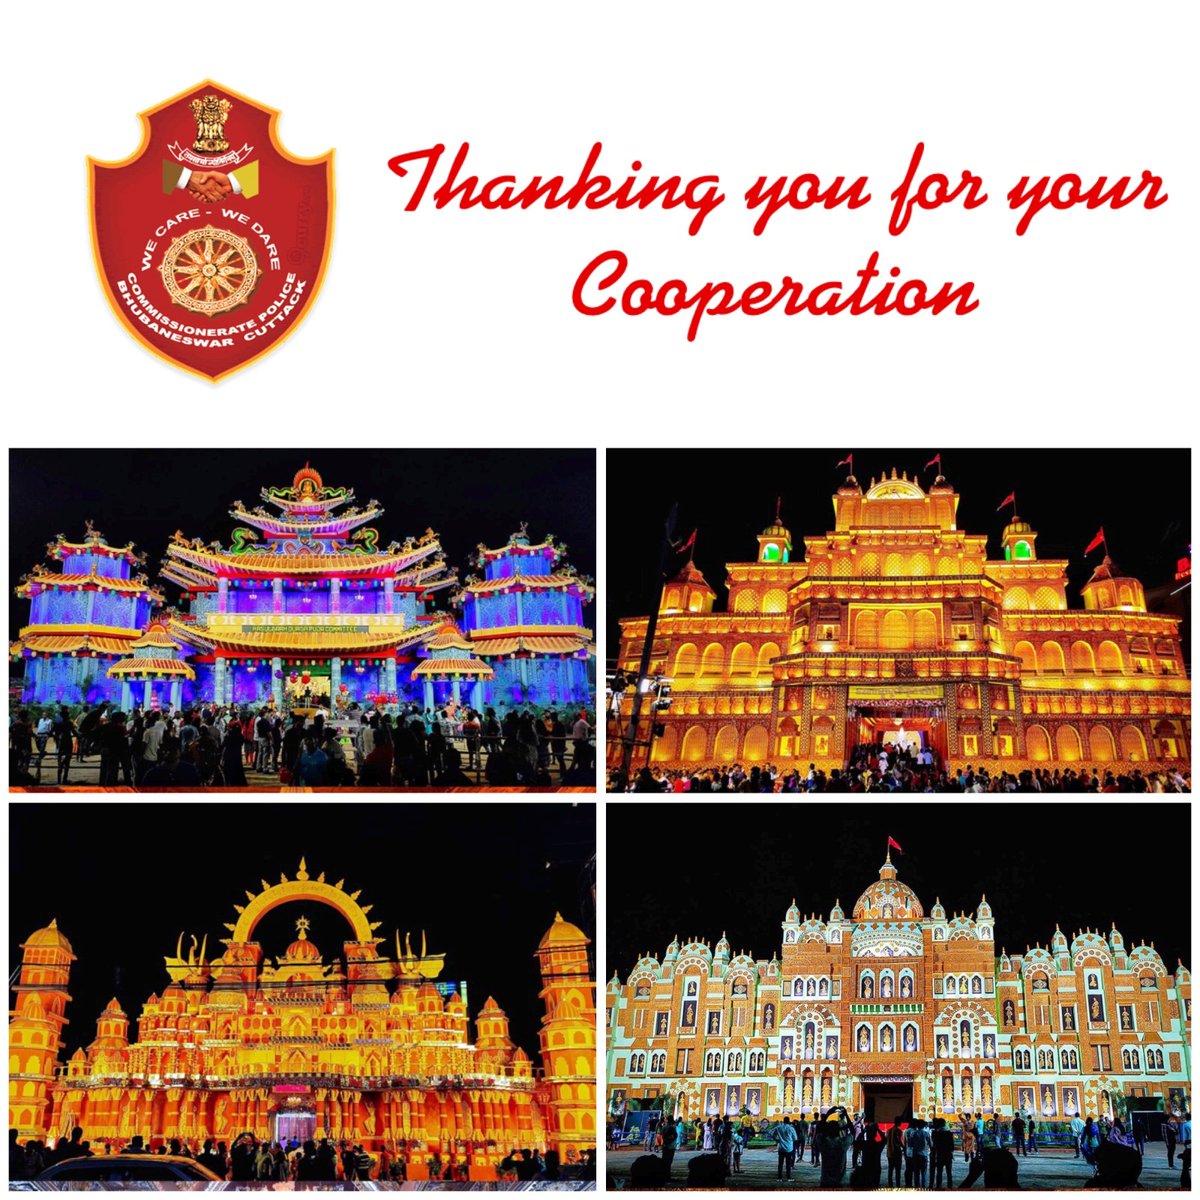 We express our gratitude to the public & pooja pandal committees for their cooperation and support during all incident-free events of Durga Puja & Dusshera. We appreciate maintaining peace and Law and order in the Twin-City in a collaborative manner. #durgapuja2023 #DurgaPuja